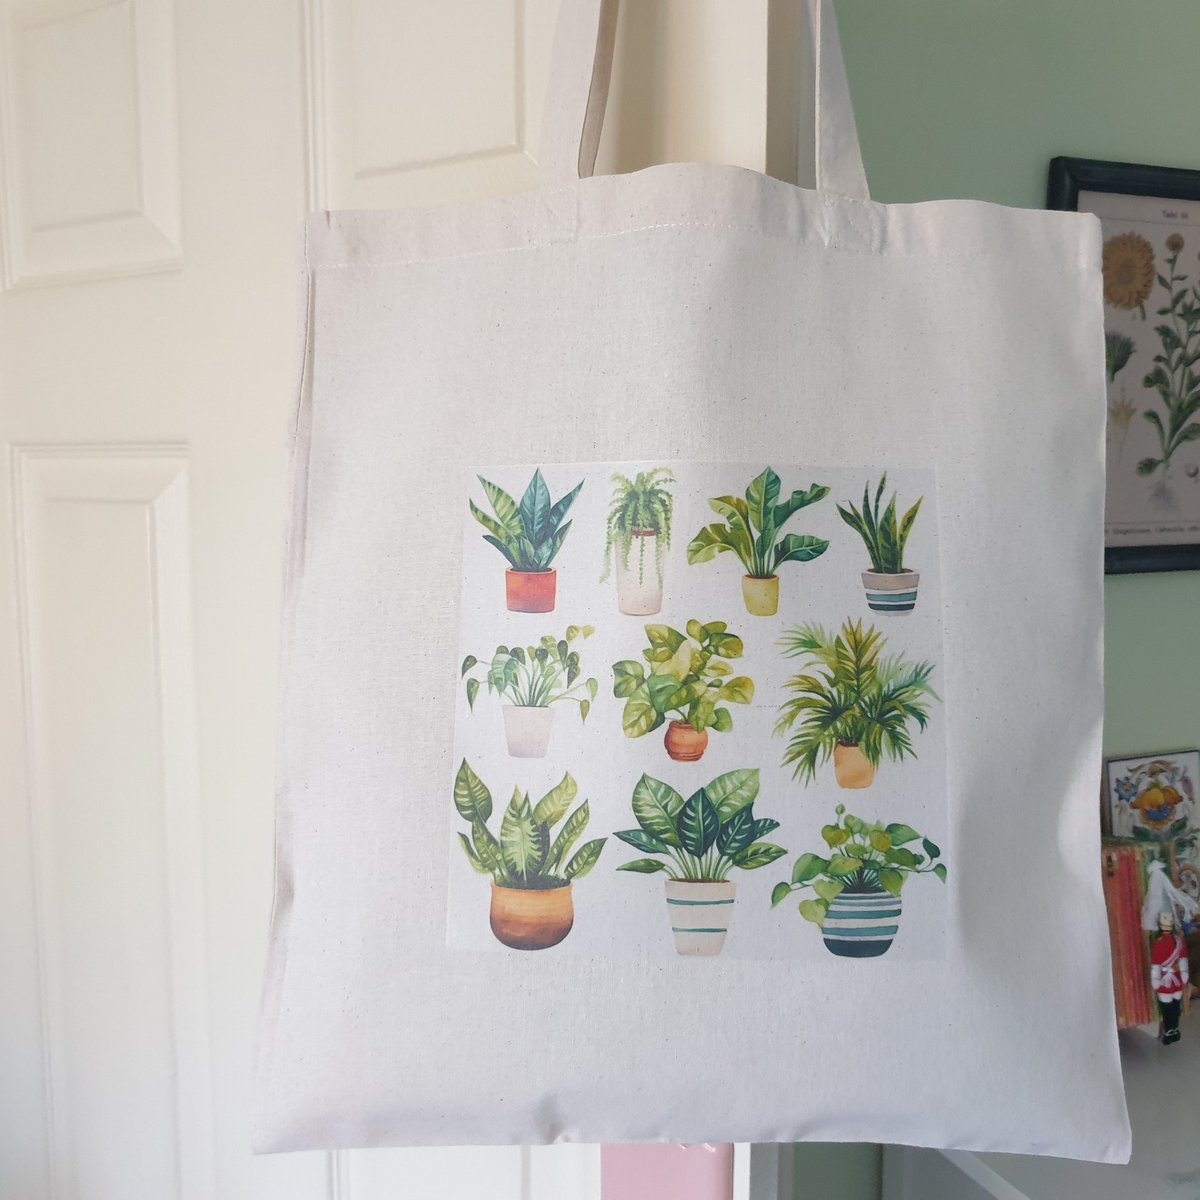 Evening #smallbizzsunday - today's new make is a house plant cotton tote. House plants have made a resurgence lately so I had to add this tote to my collection of totes I have for sale! All totes are sent postage free 🪴🪴🪴🪴🪴🪴
#craftbizparty 
sarahbenning.etsy.com/listing/169620…